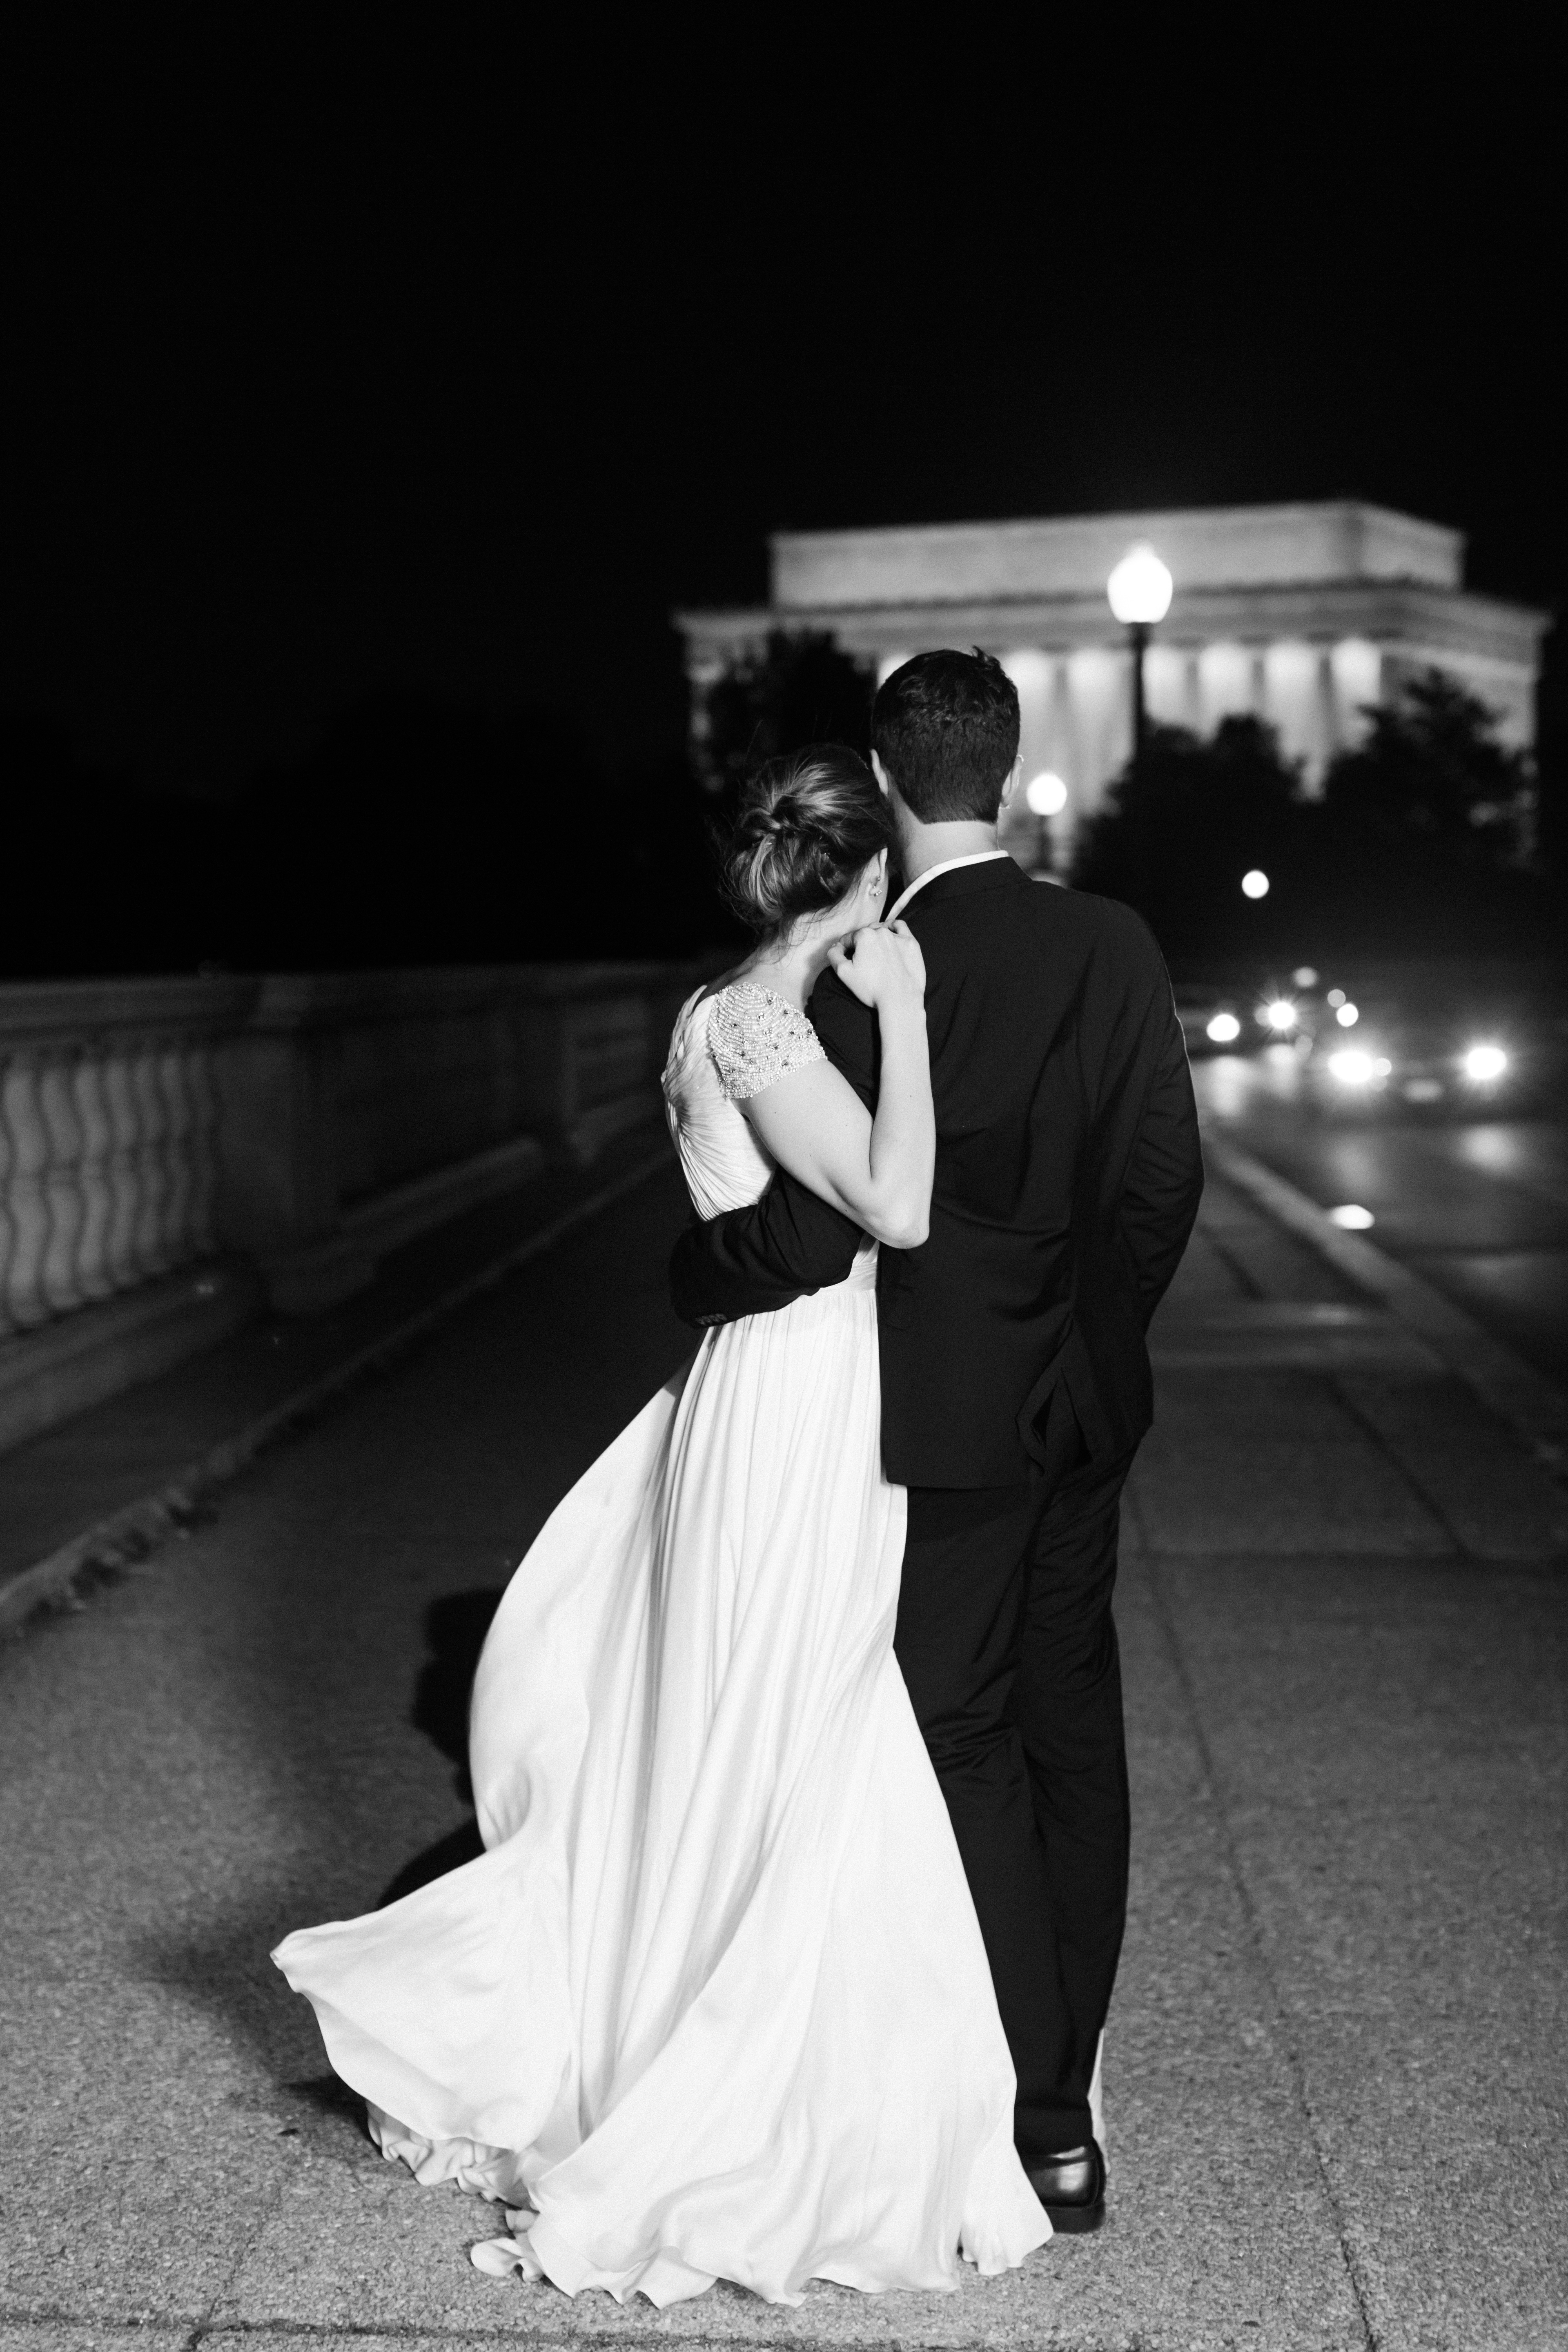 Formal Engagement Portraits on Memorial Bridge in DC, Black Tie Evening Engagement Session at Kennedy Center and Memorial Bridge, Sarah Bradshaw Photography